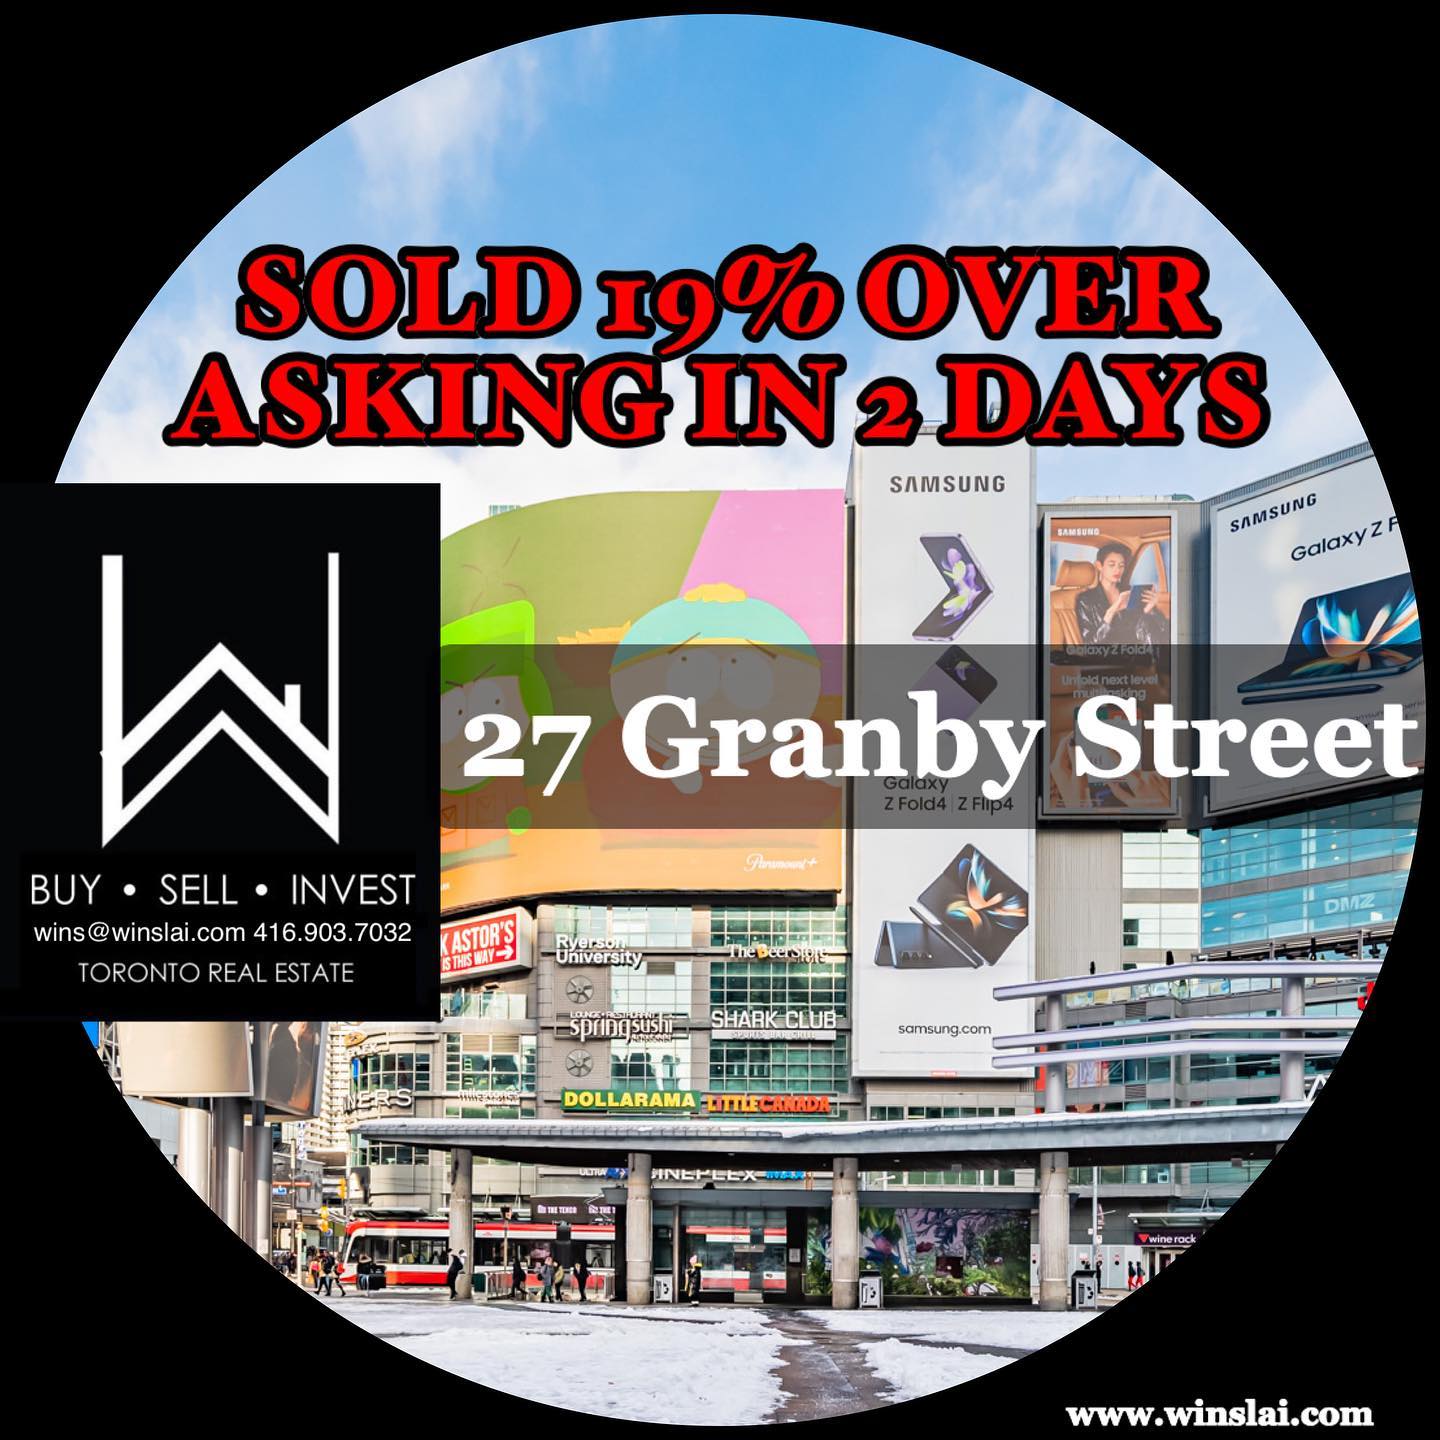 33. 27 Granby Street Sold 19 Over Asking In 2 Days Flyer